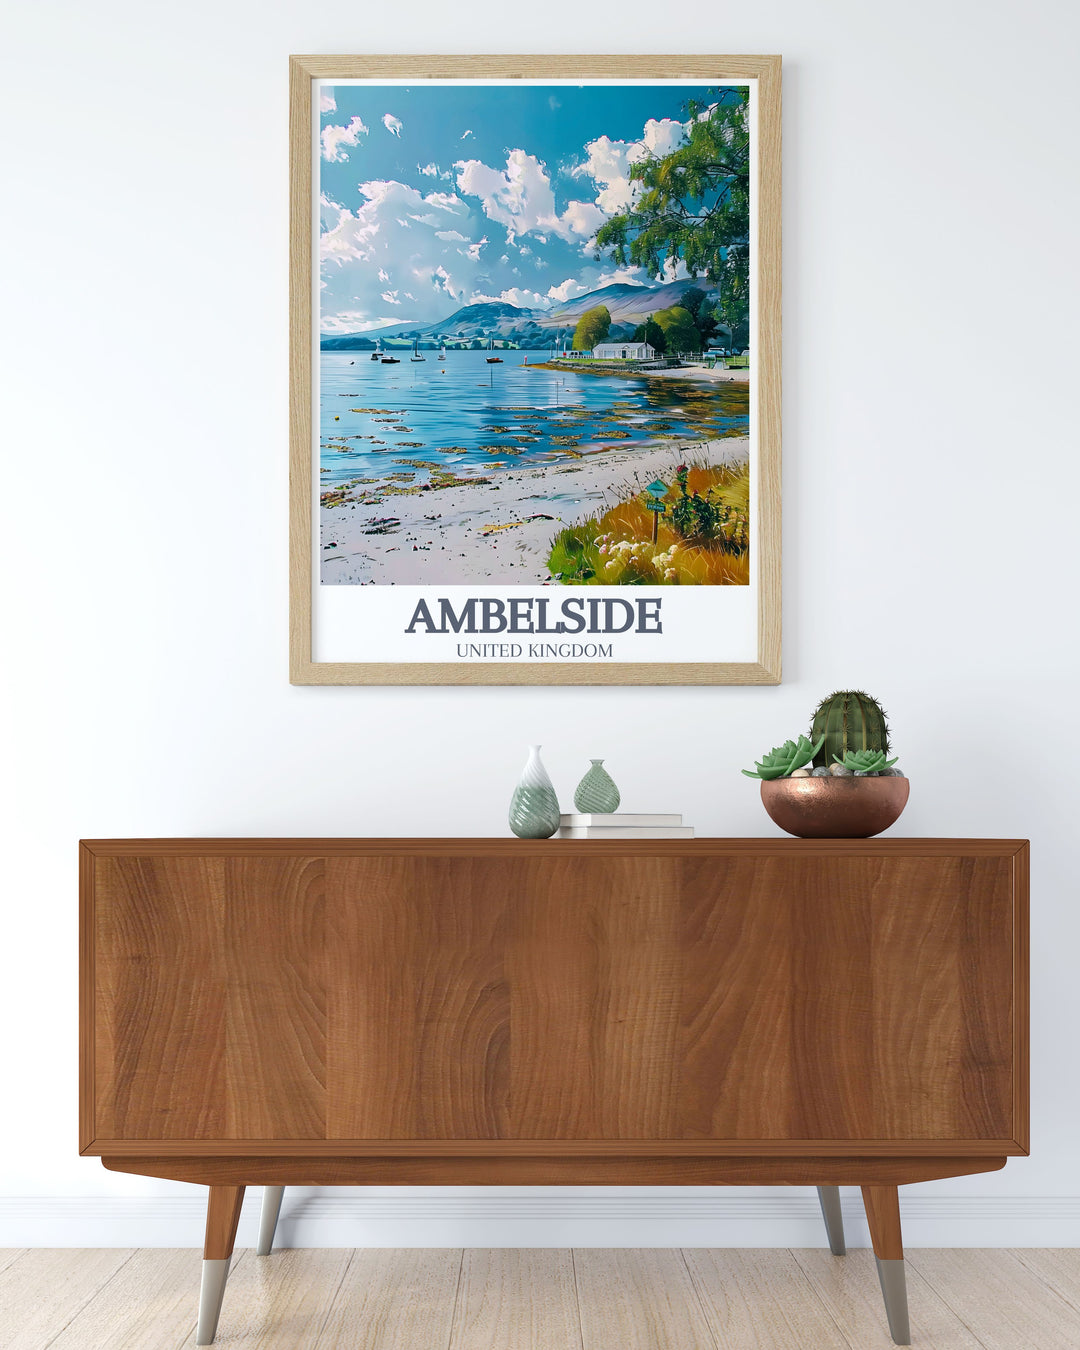 Ambleside wall art featuring the stunning Lake Windermere, designed to bring a sense of peace and natural beauty to your home decor.